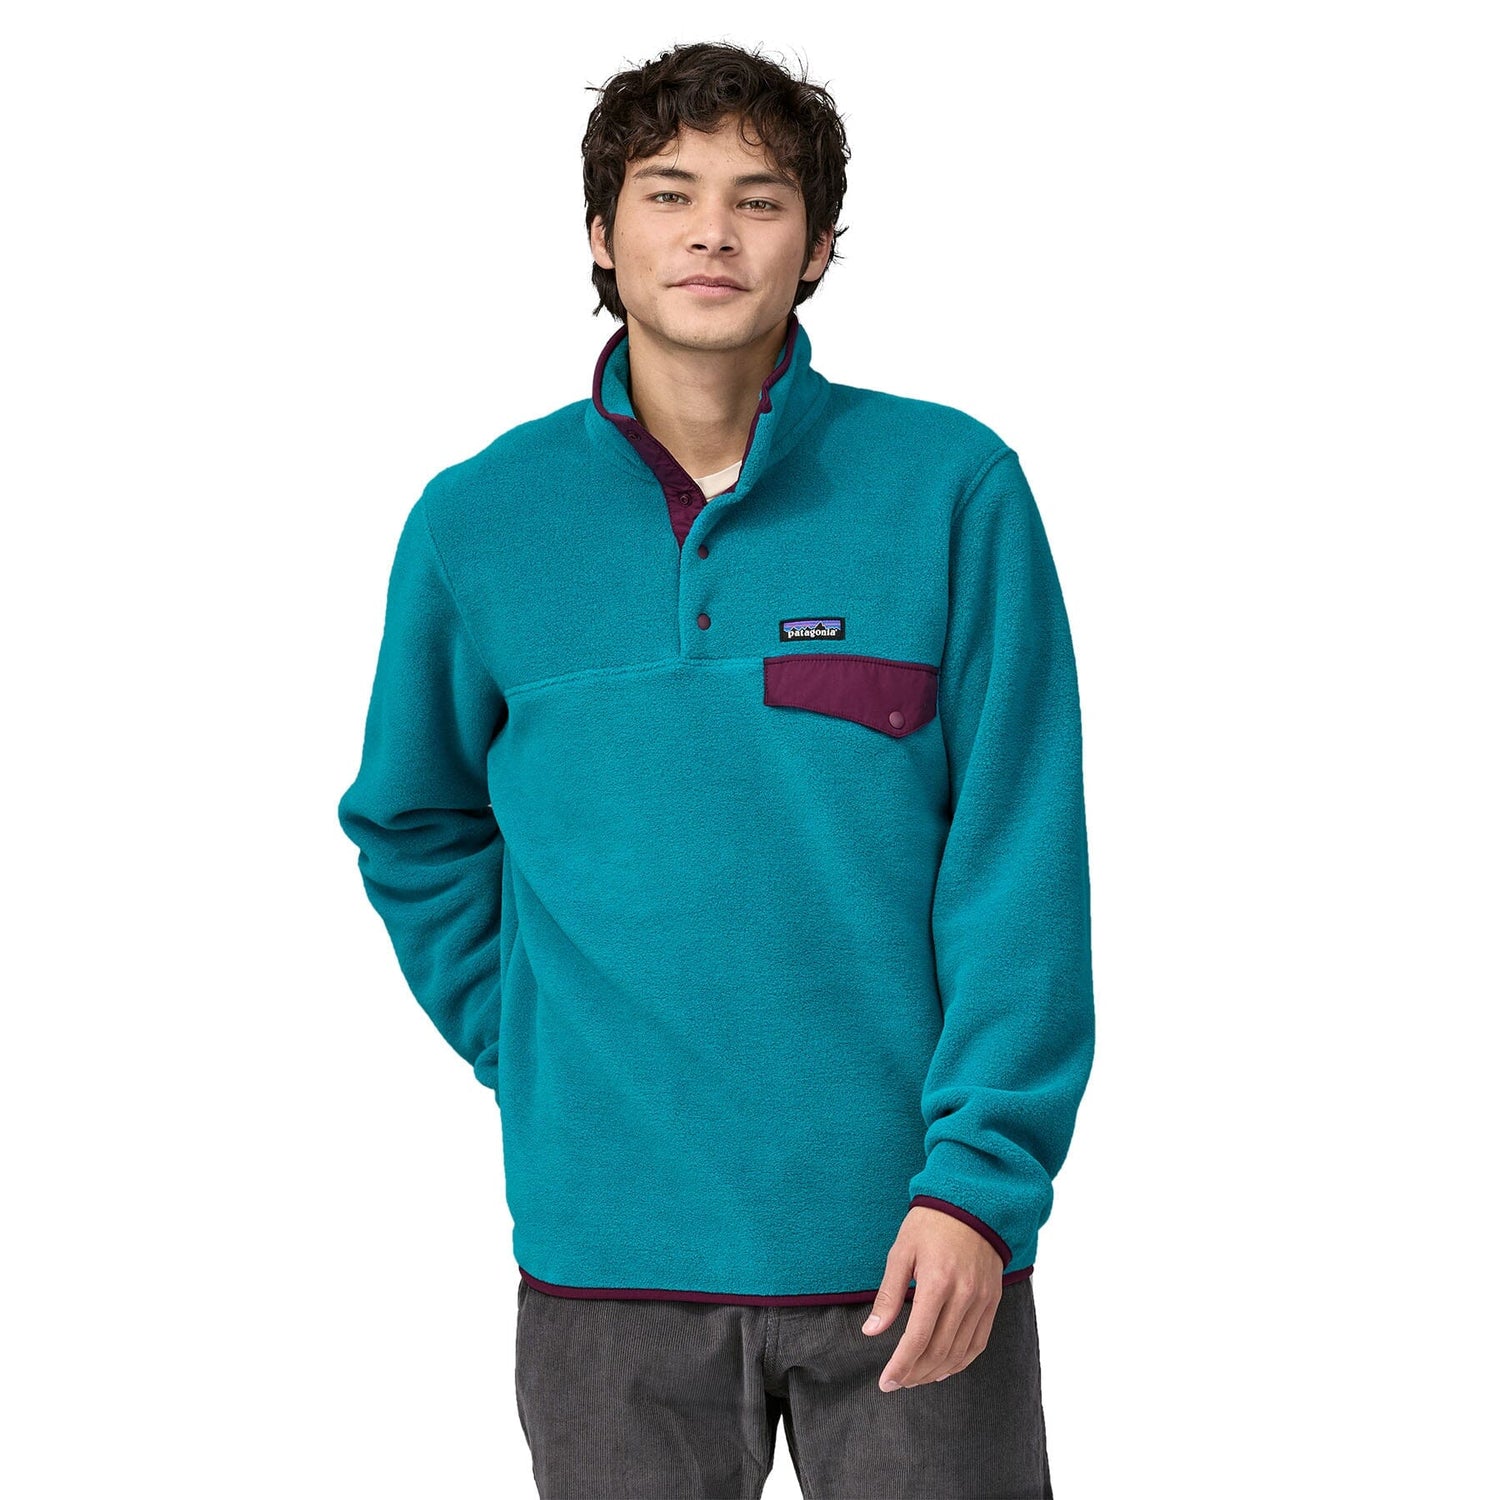 Patagonia M's LW Synch Snap-T Fleece Pullover - 100% Recycled Polyester Belay Blue Shirt